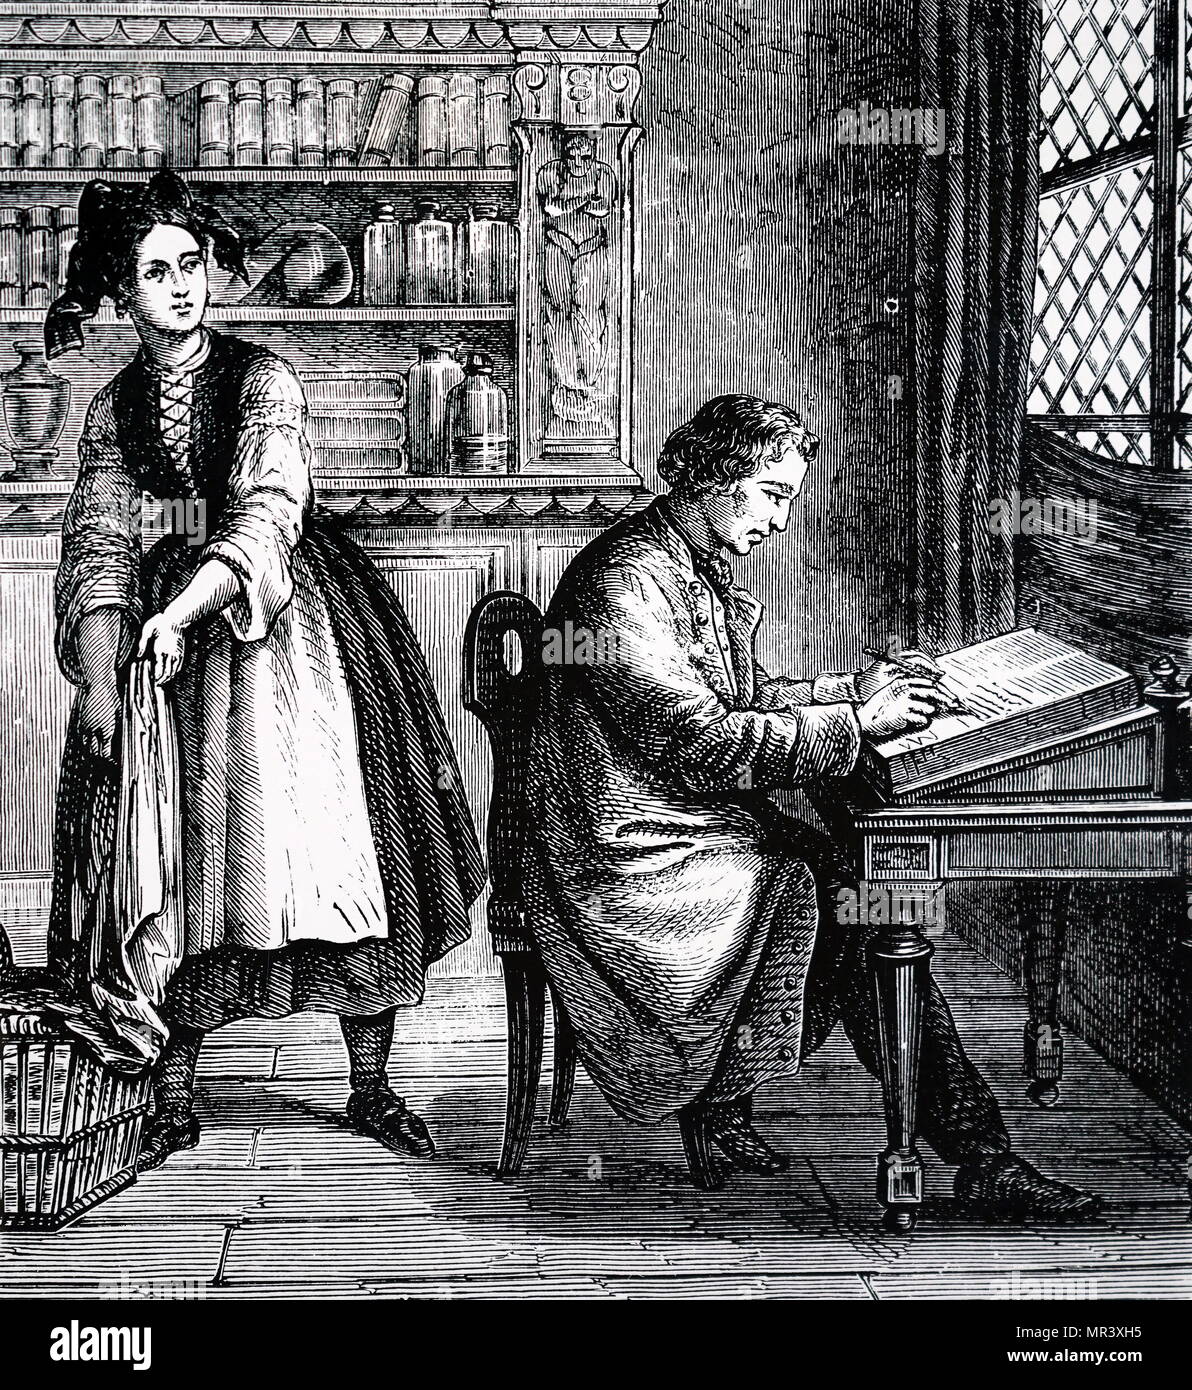 Illustration depicting Johann Alois Senefelder discovering the process of lithography by chance. Johann Alois Senefelder  (1771-1834) a German actor and playwright who invented the printing technique of lithography. Dated 19th century Stock Photo